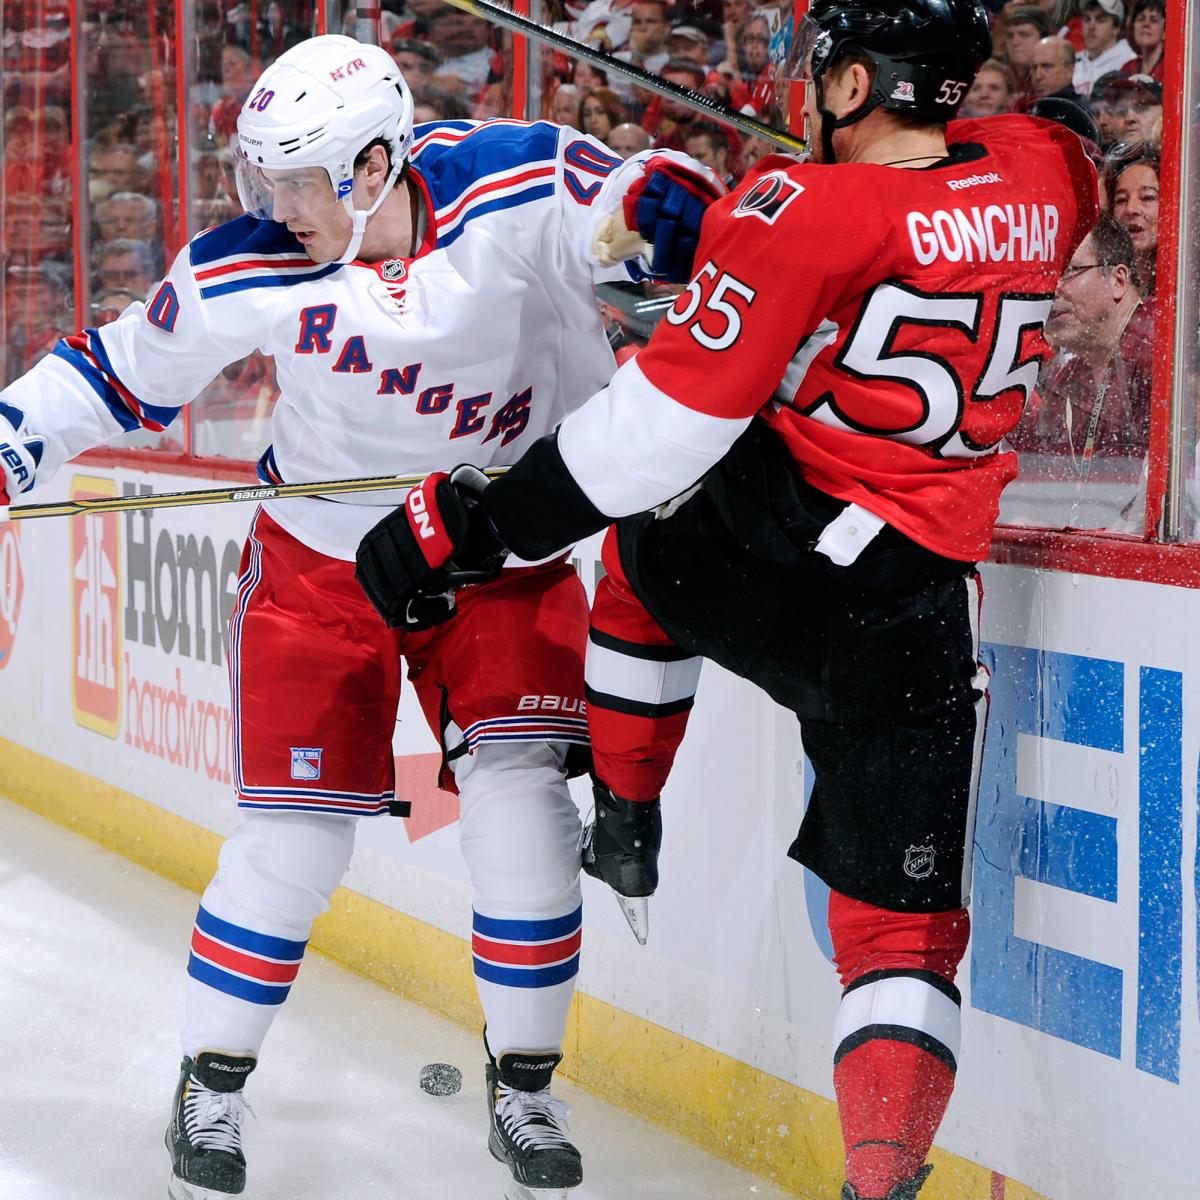 2012 NHL Playoffs Chris Kreider Makes NHL Debut in Game 3 with Rangers